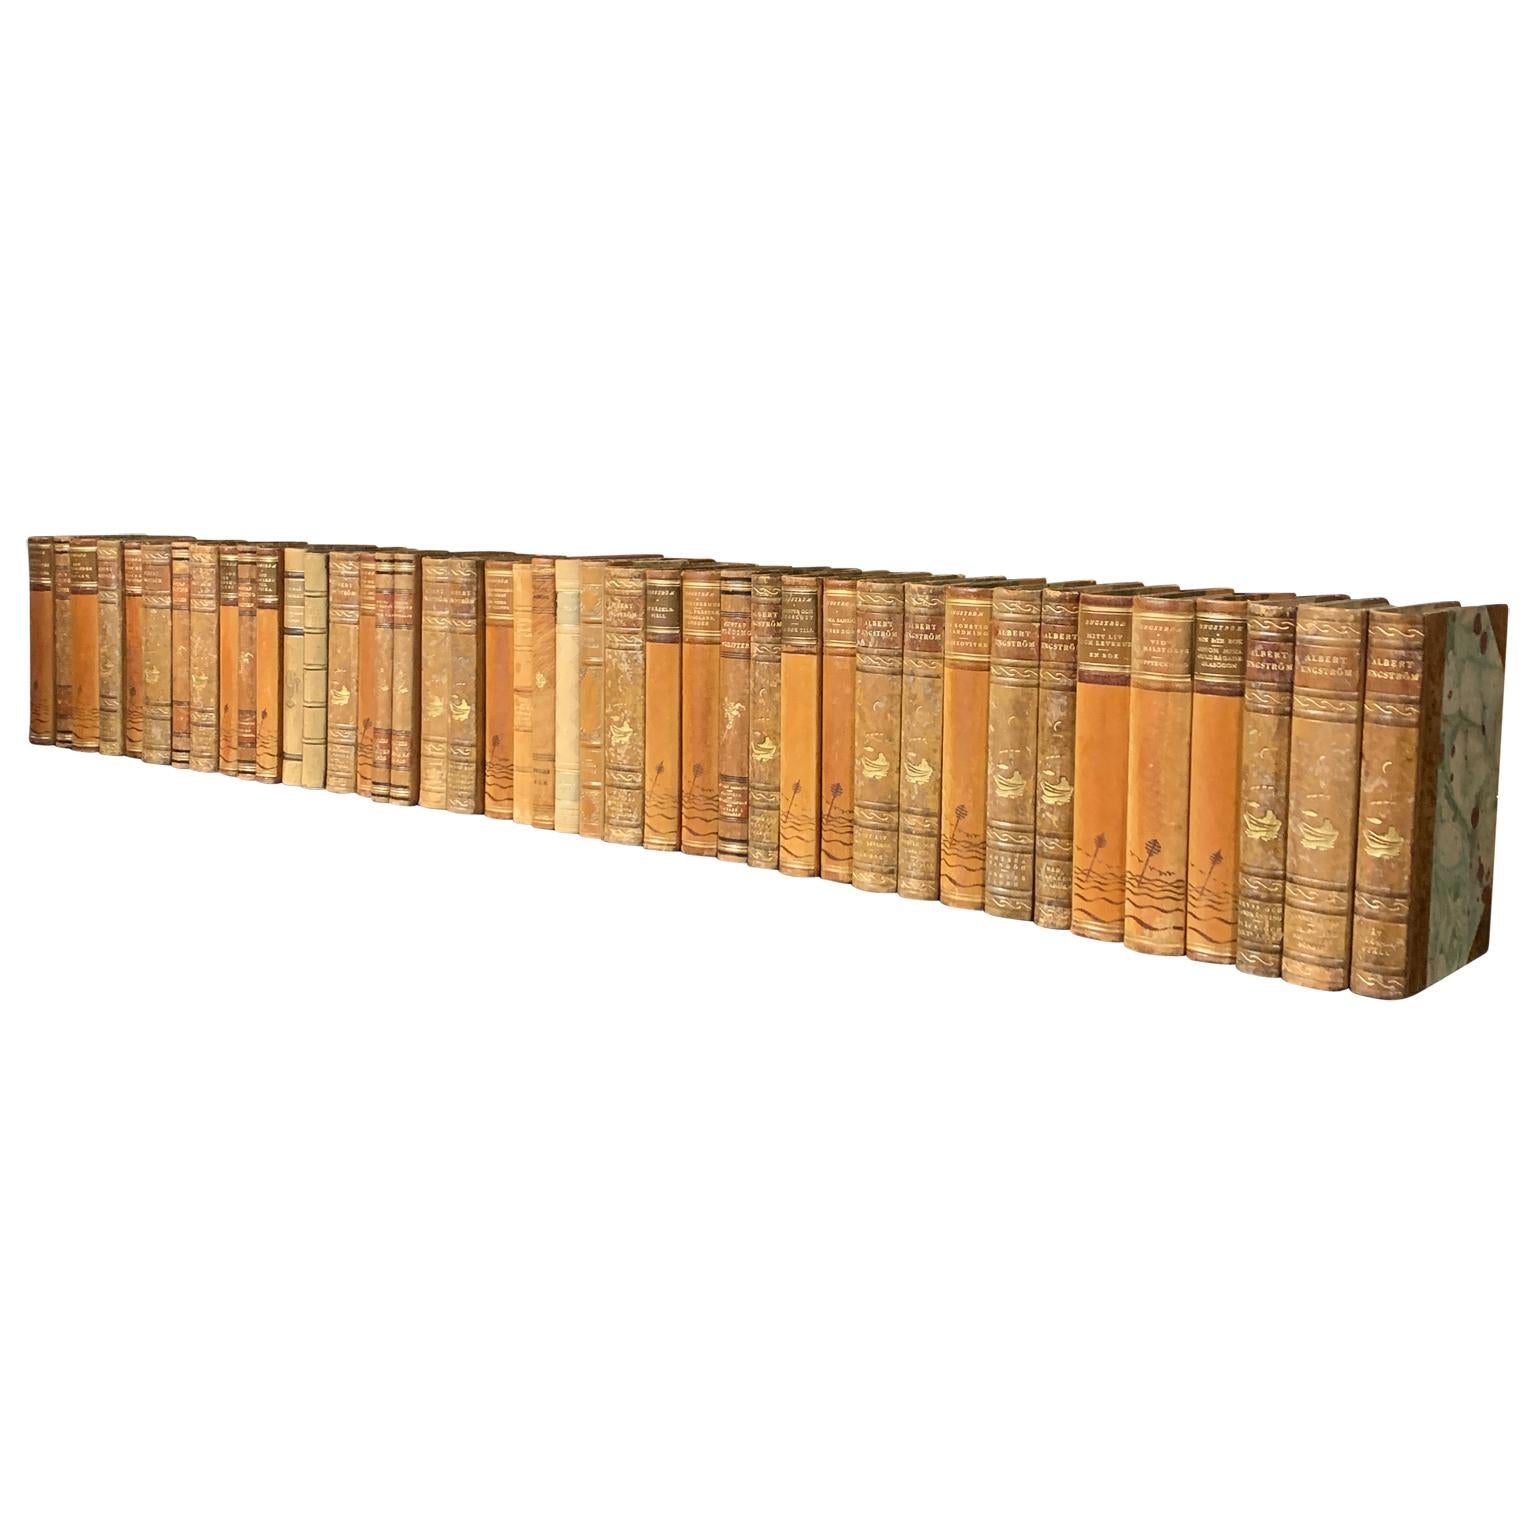 A collection of 47 Swedish decorative antique leather-bound library books from the from the 1930s-1940s.
The books are wrapped in leather-bound covers, comprised of a selection of warm tones and gold leaf print embossing.
The book collection